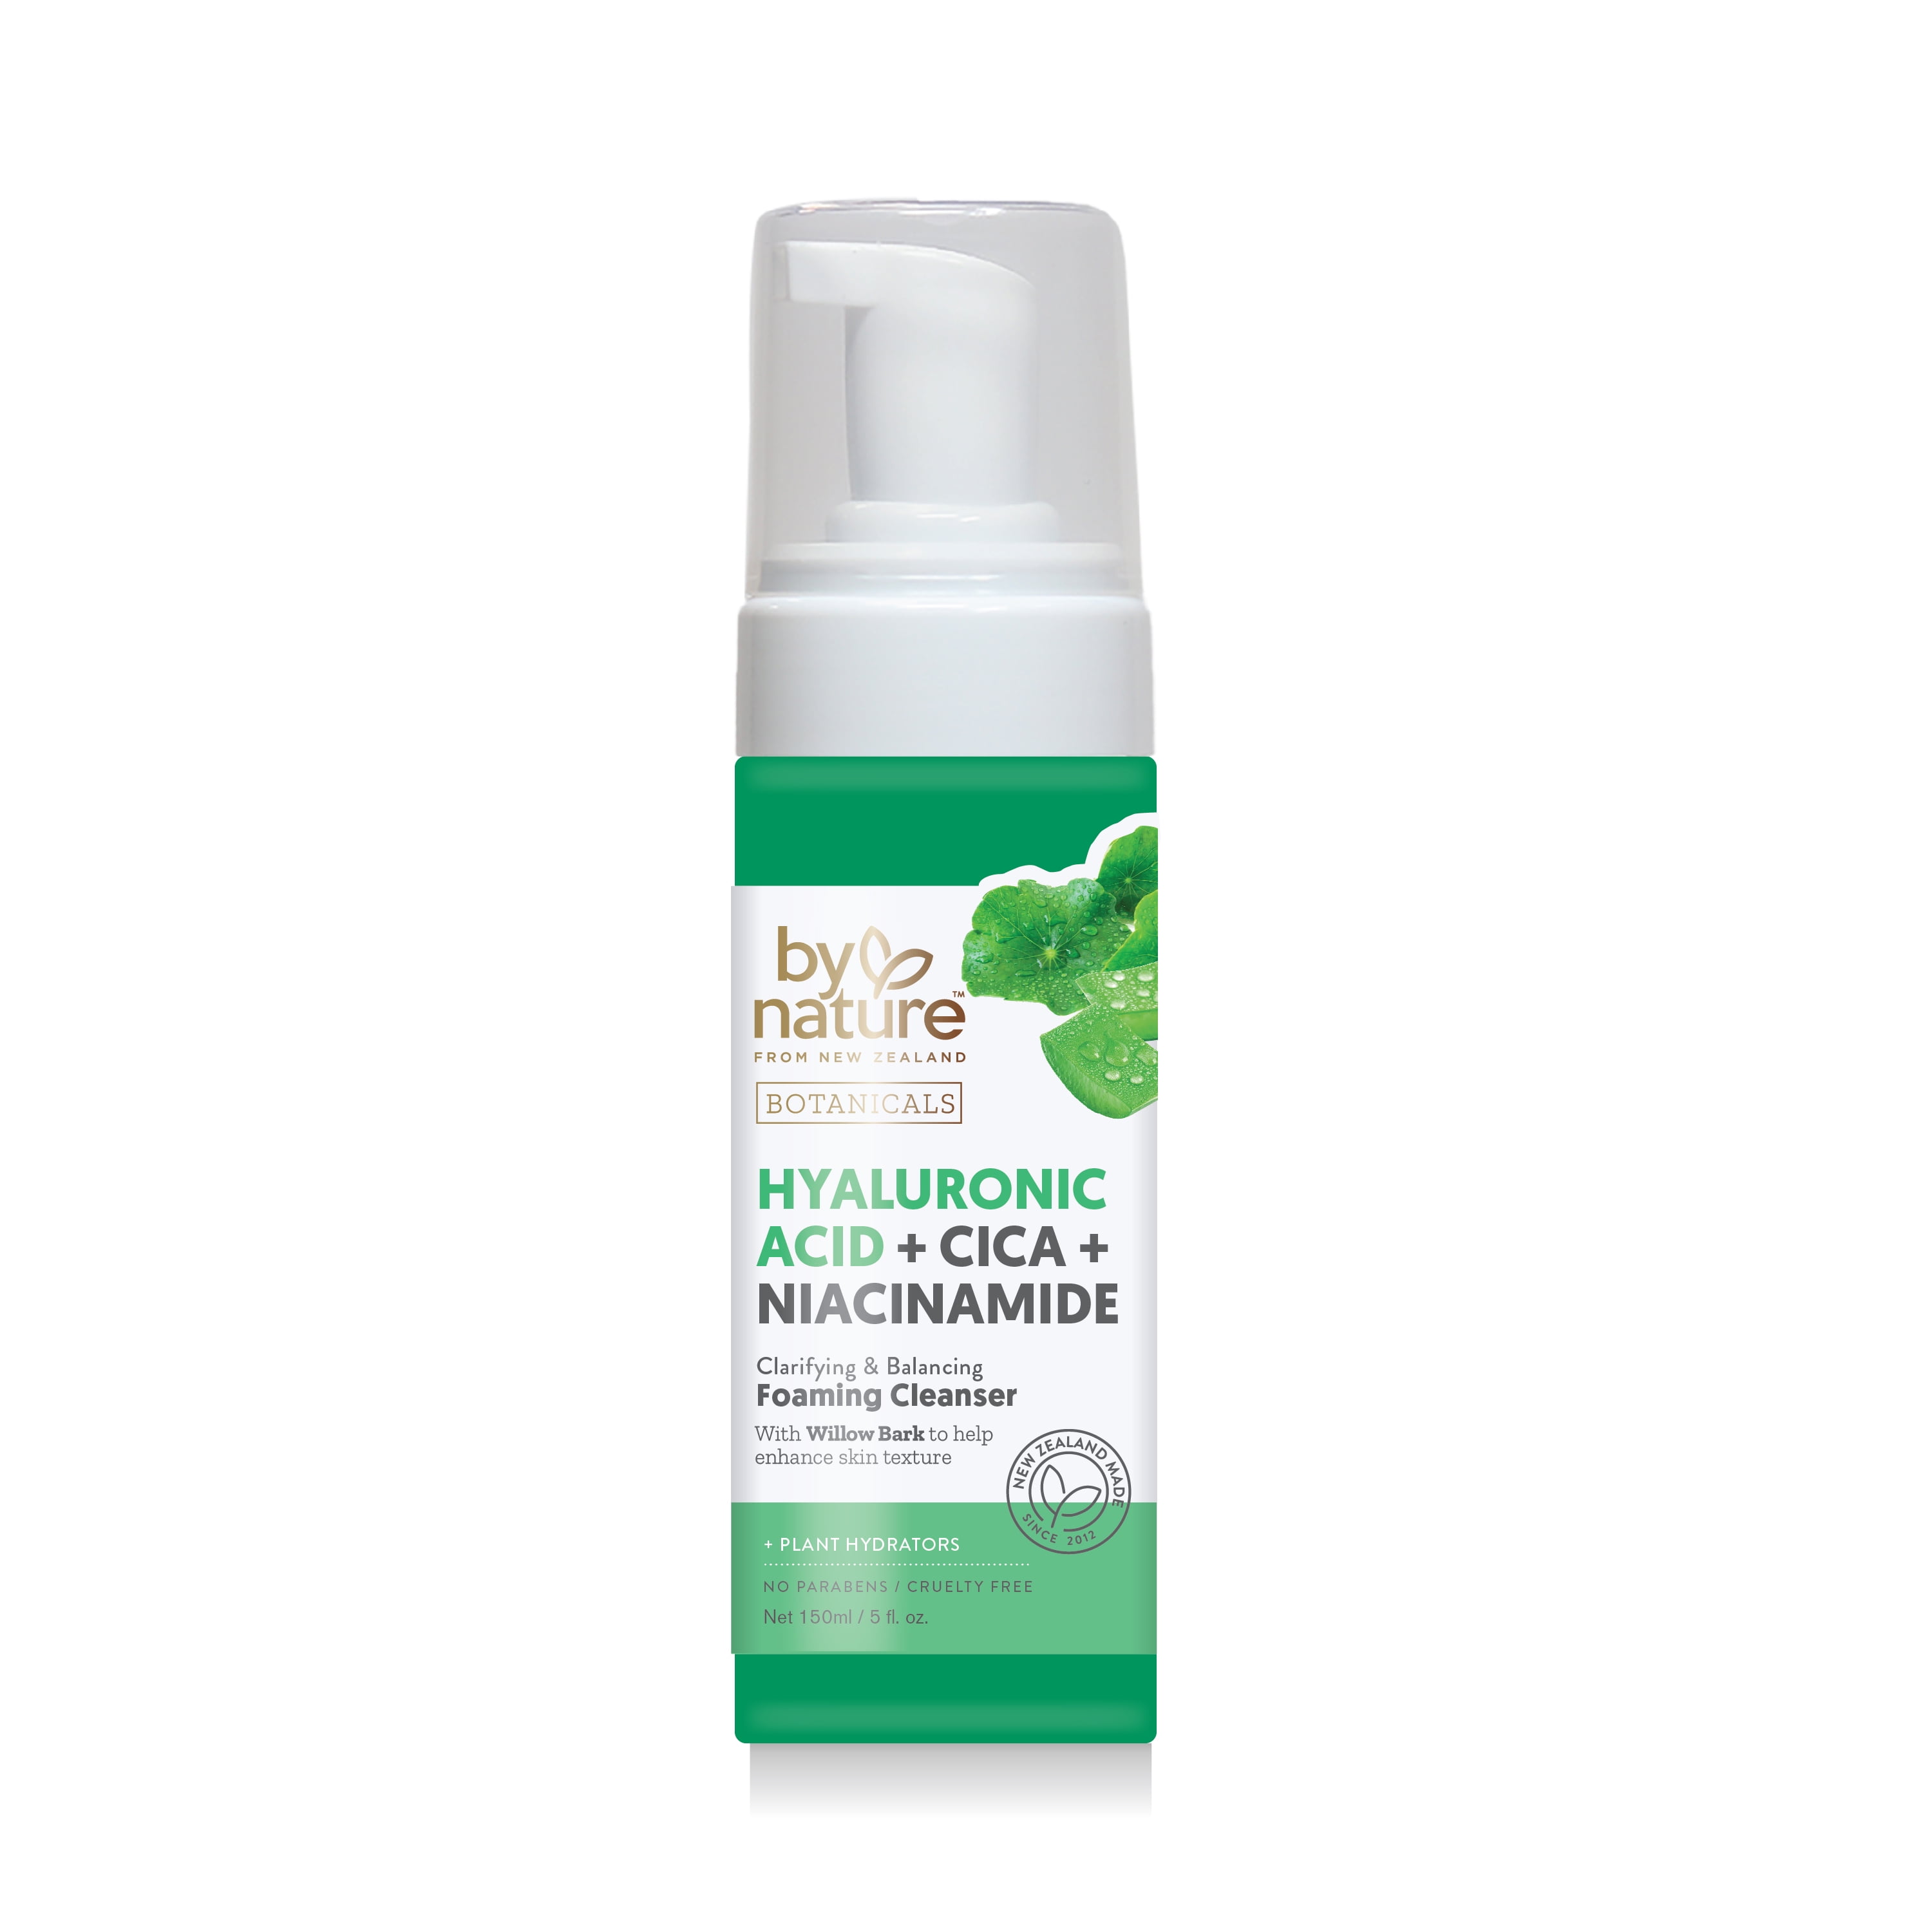 By Nature from New Zealand Hyaluronic Acid + Cica + Niacinamide